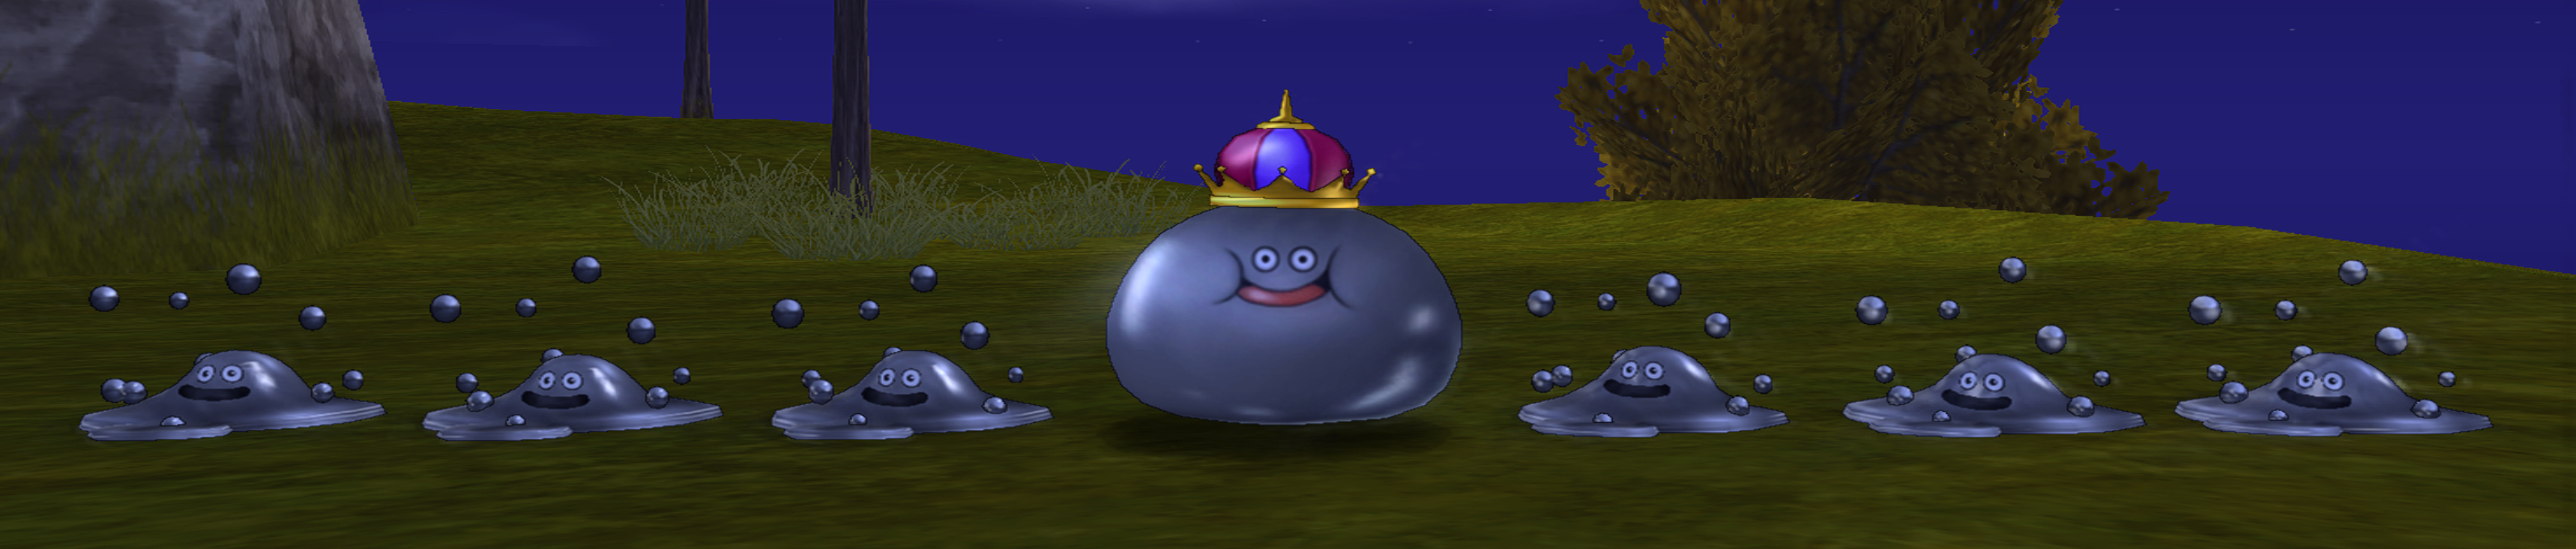 An enemy encounter consisting of a Metal King Slime flanked by three Liquid Metal Slimes on both sides